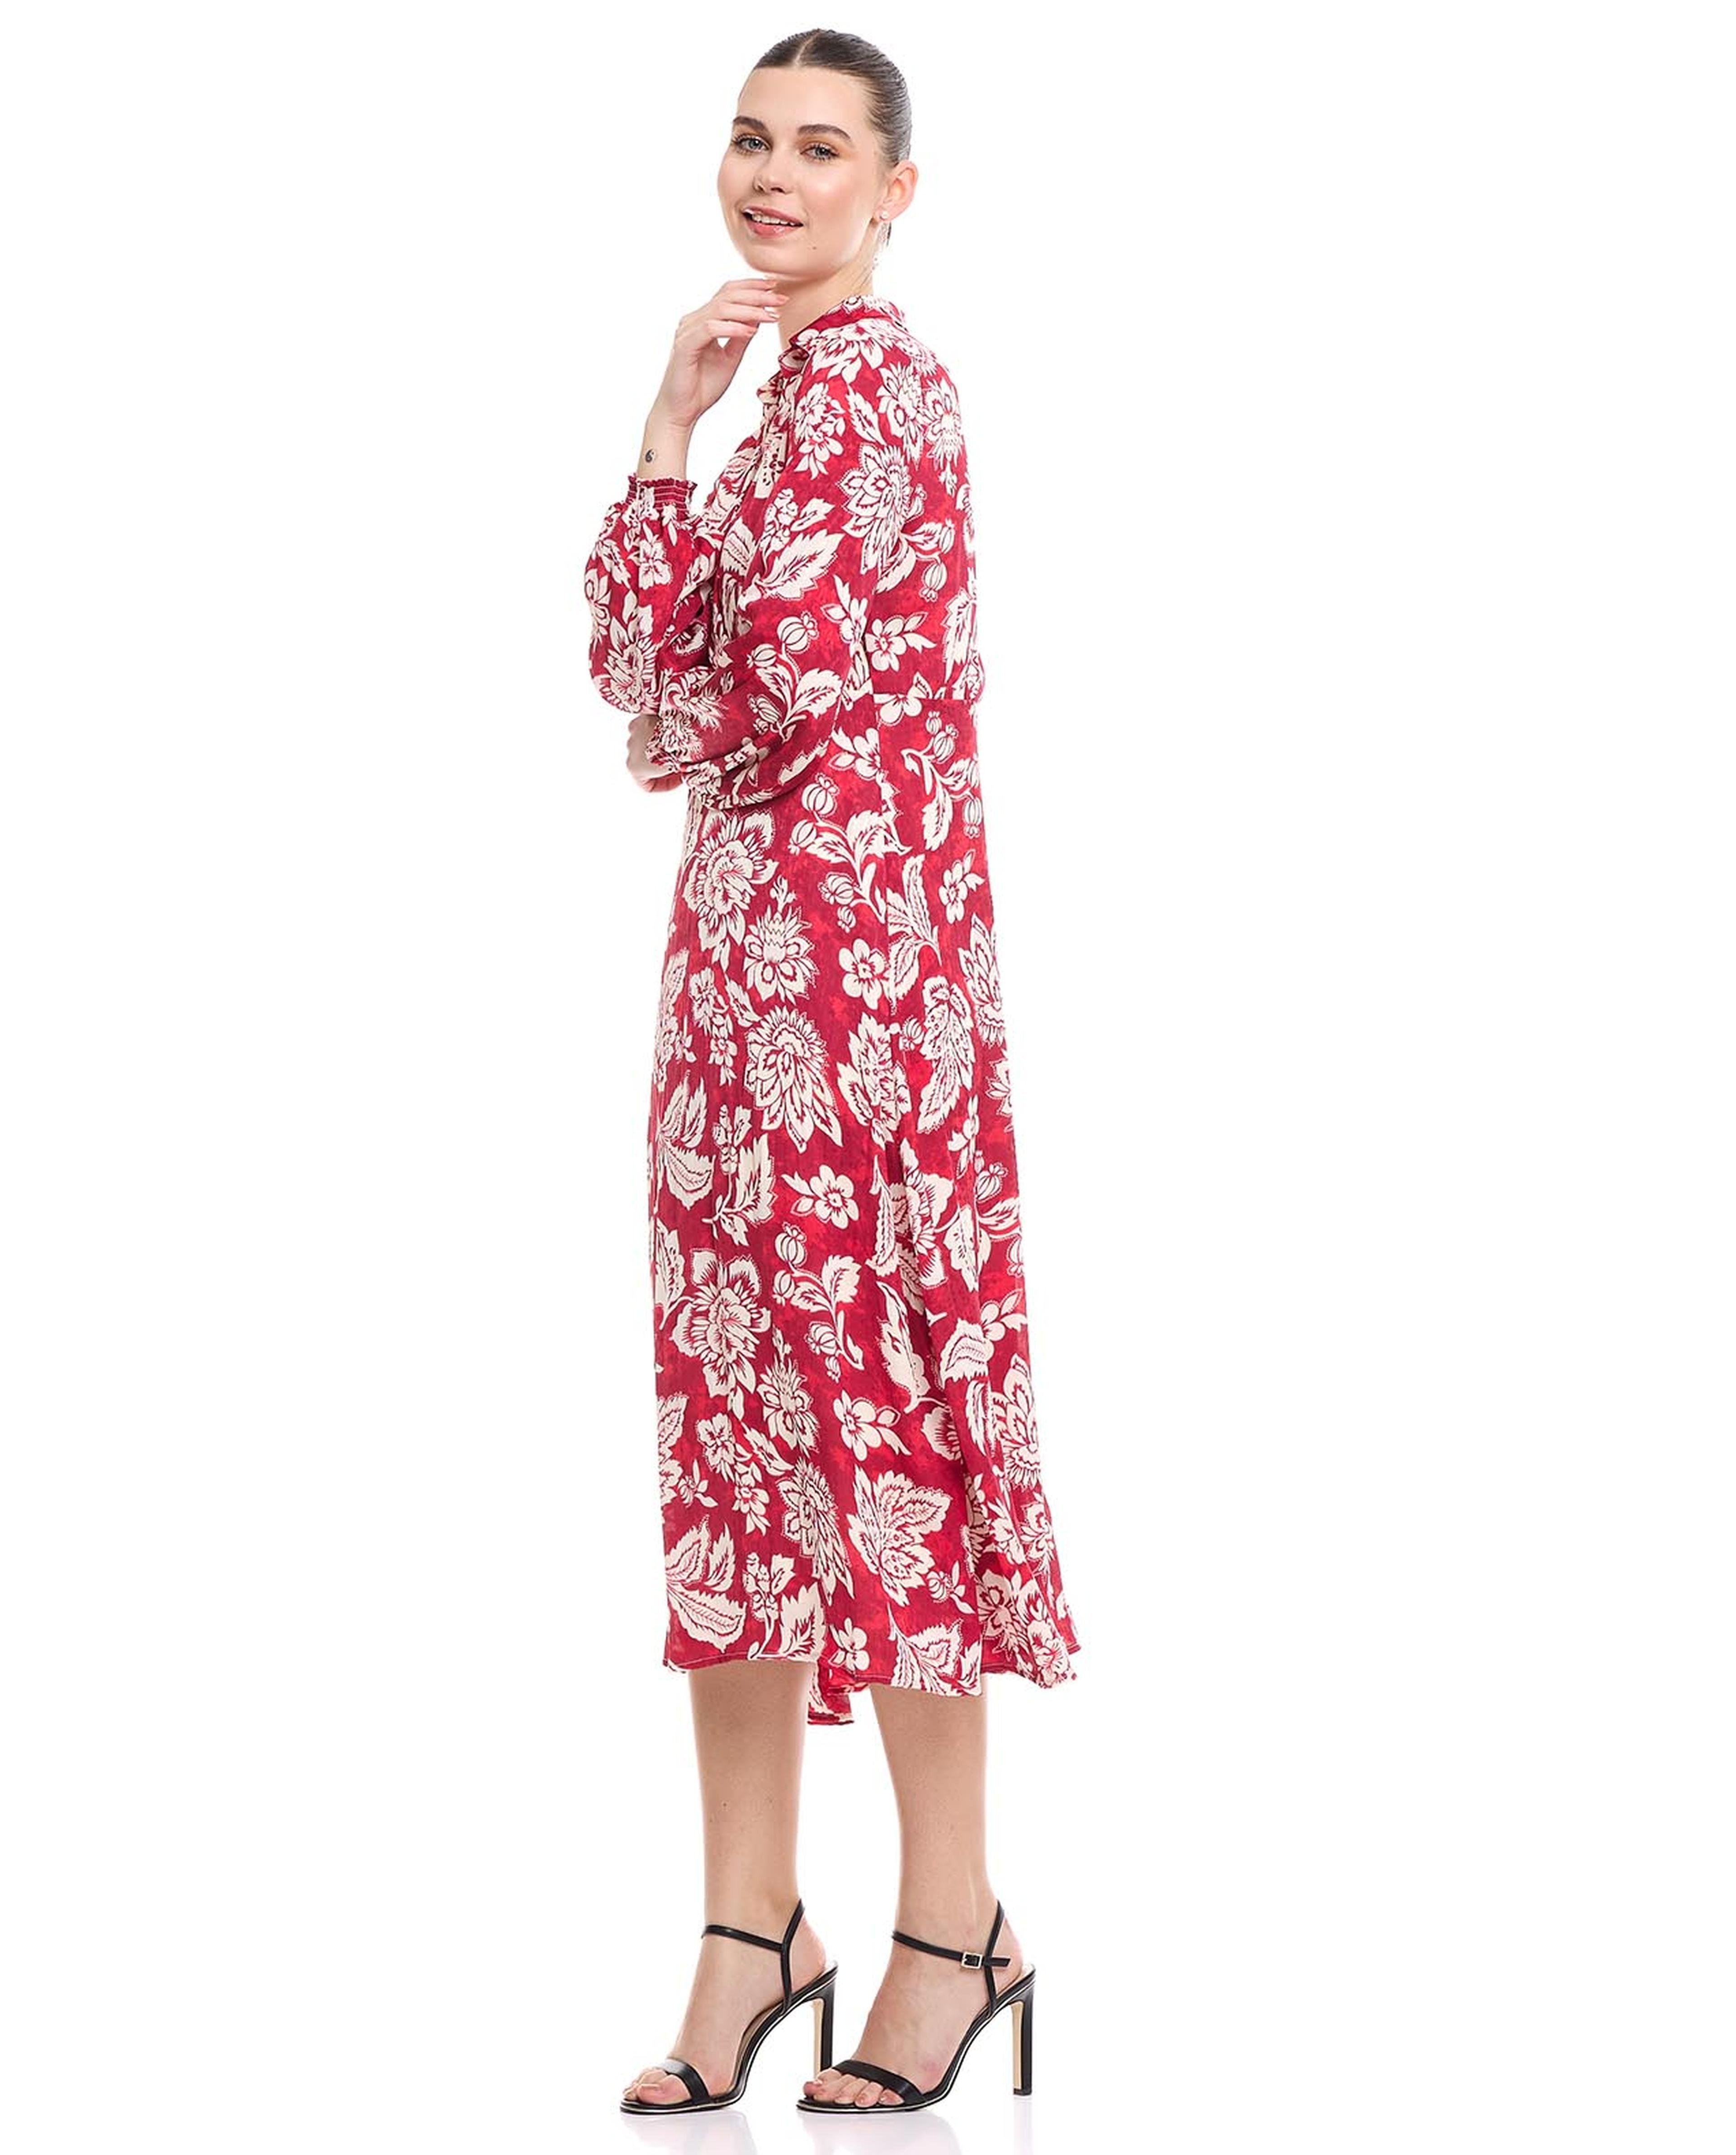 Floral Print A-Line Dress with V-Neck and Bishop Sleeves